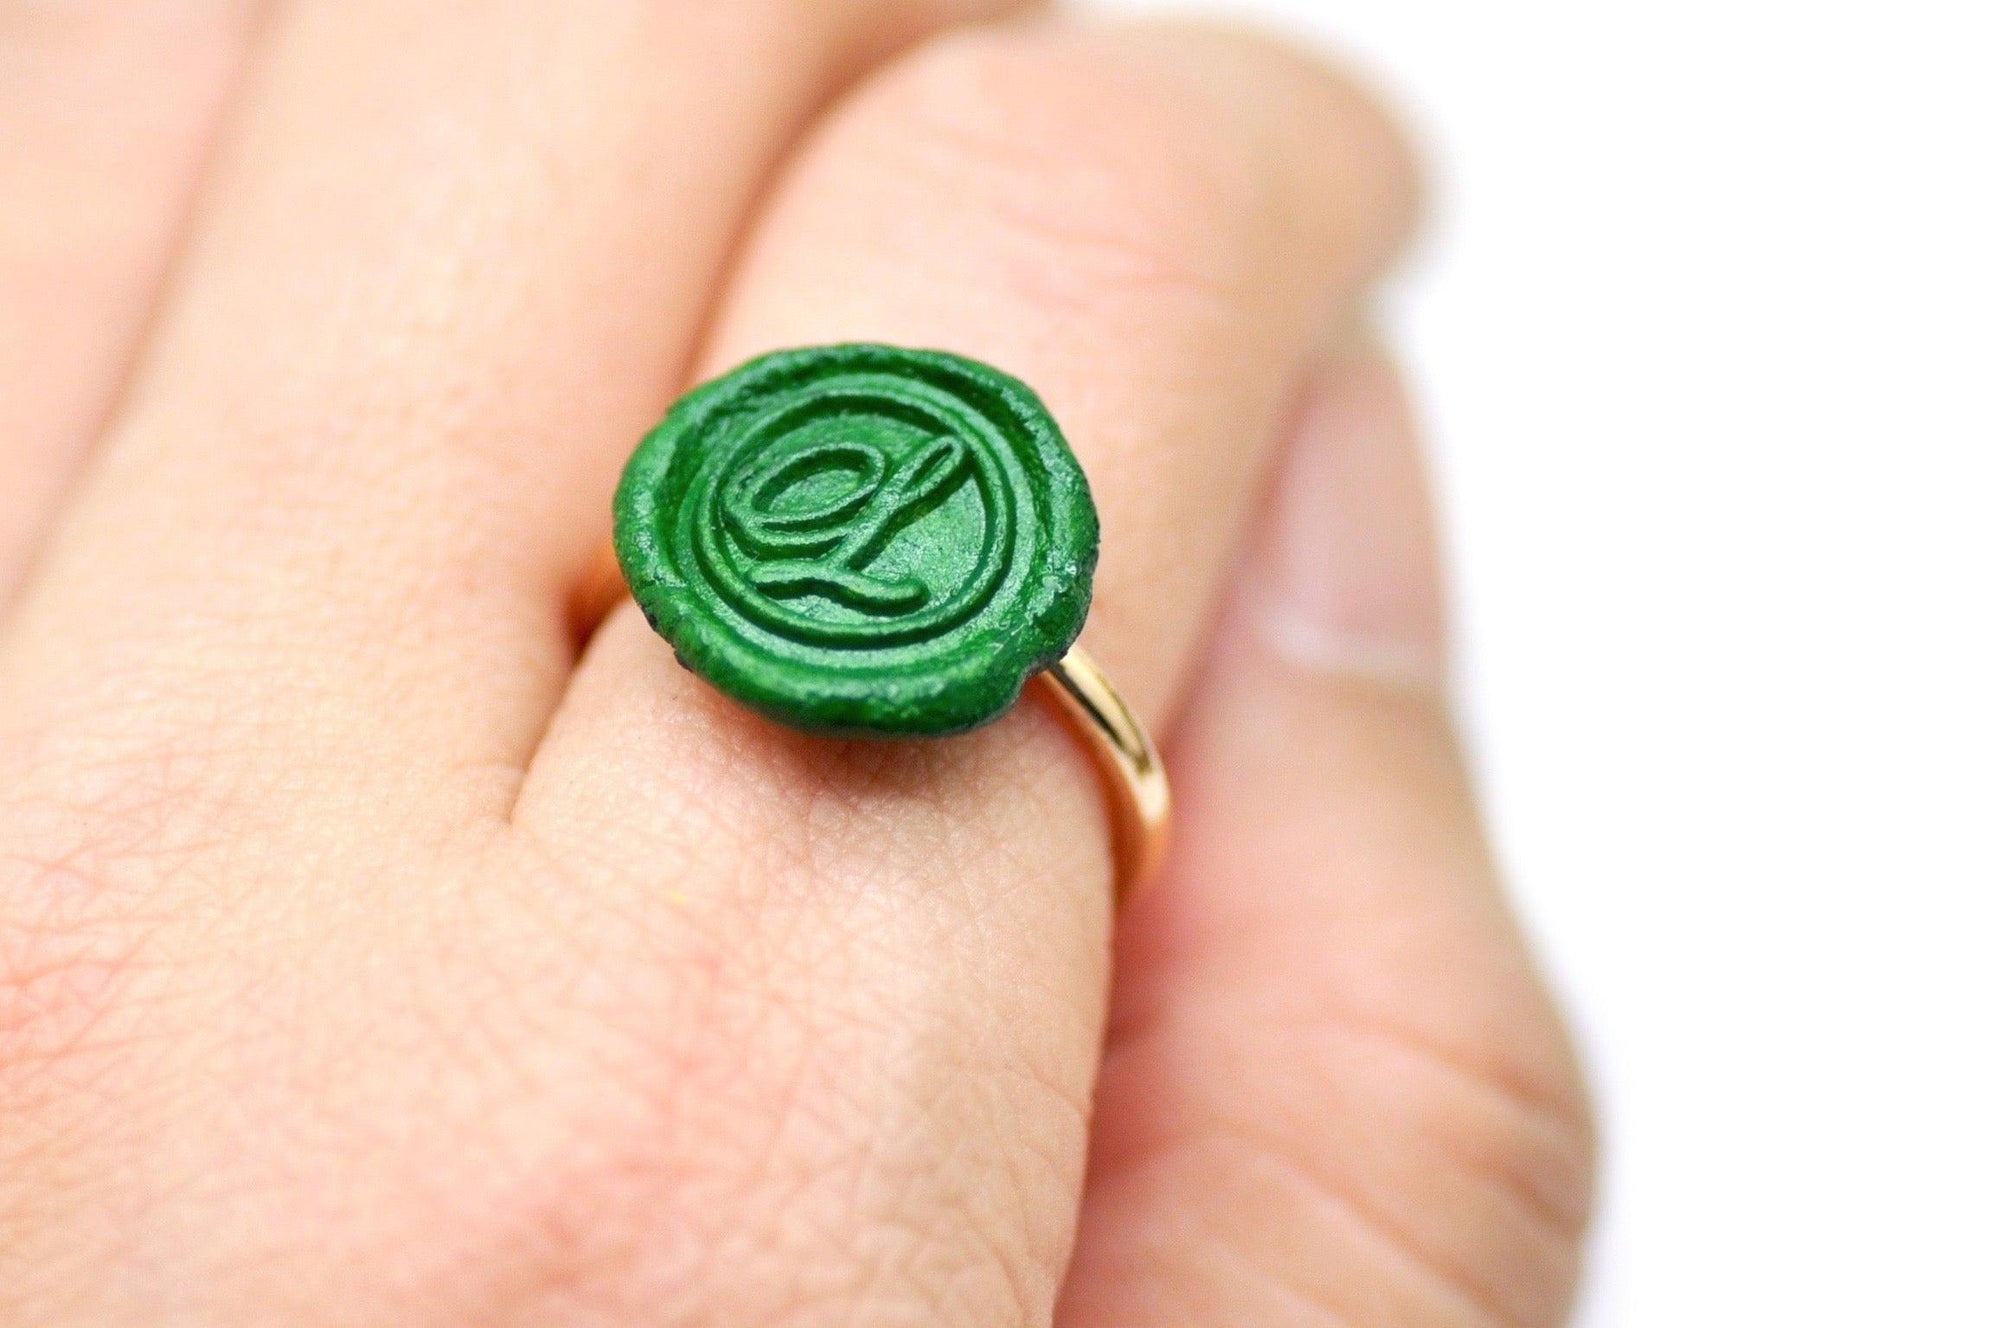 OOAK Script Initial Wax Seal Ring - Backtozero B20 - 1 initial, 1initial, Green, Handmade, Initial, Letter, One Initial, OOAK, Personalized, ring, size 7